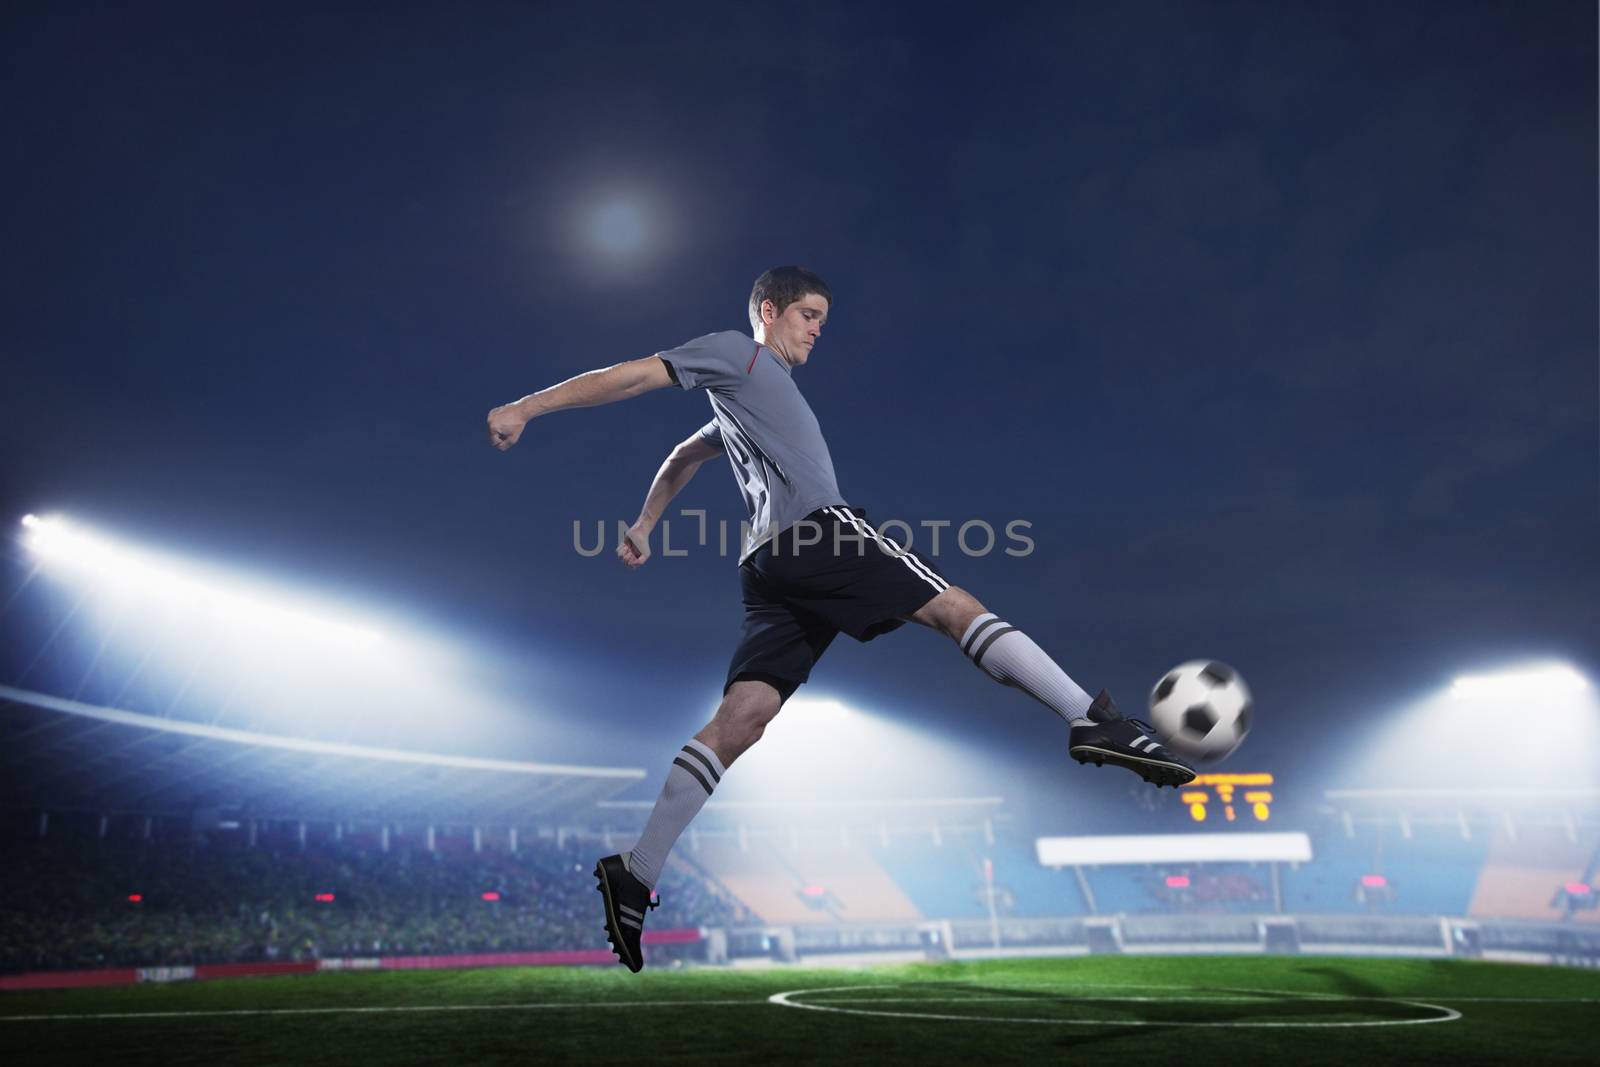 Soccer player in mid air kicking the soccer ball, stadium lights at night in background by XiXinXing